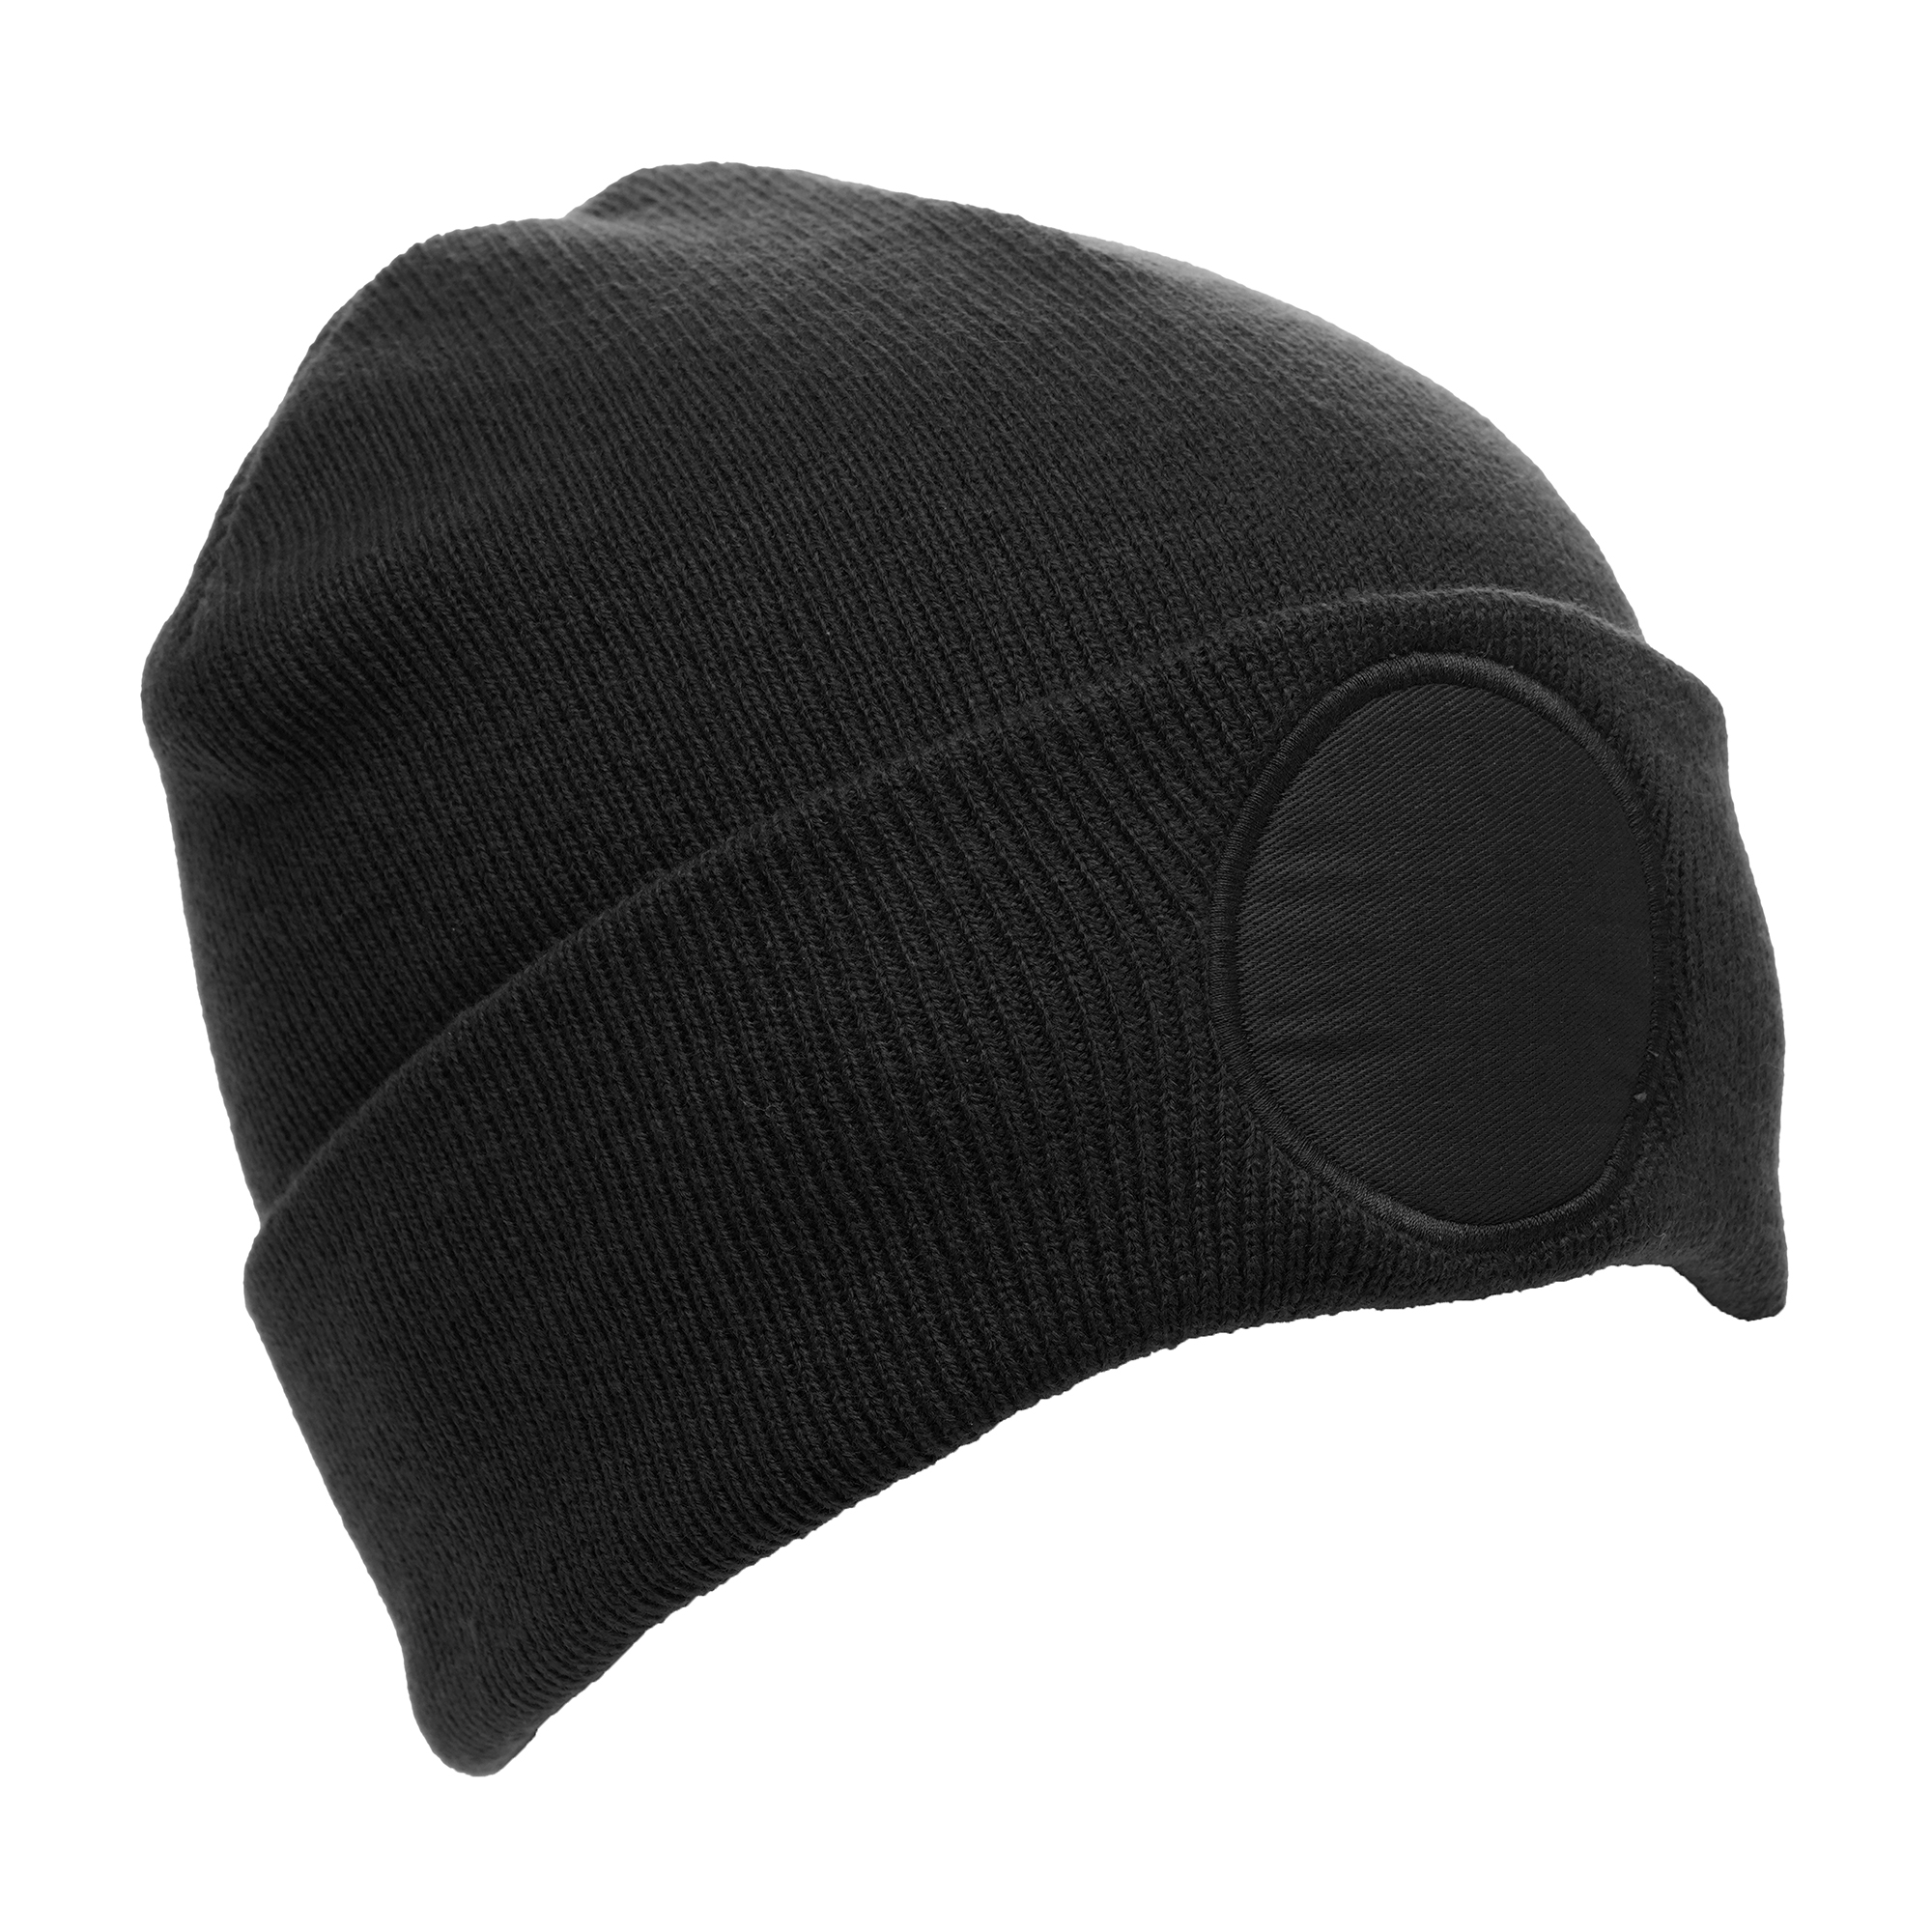 Circular Patched Beanie Hat